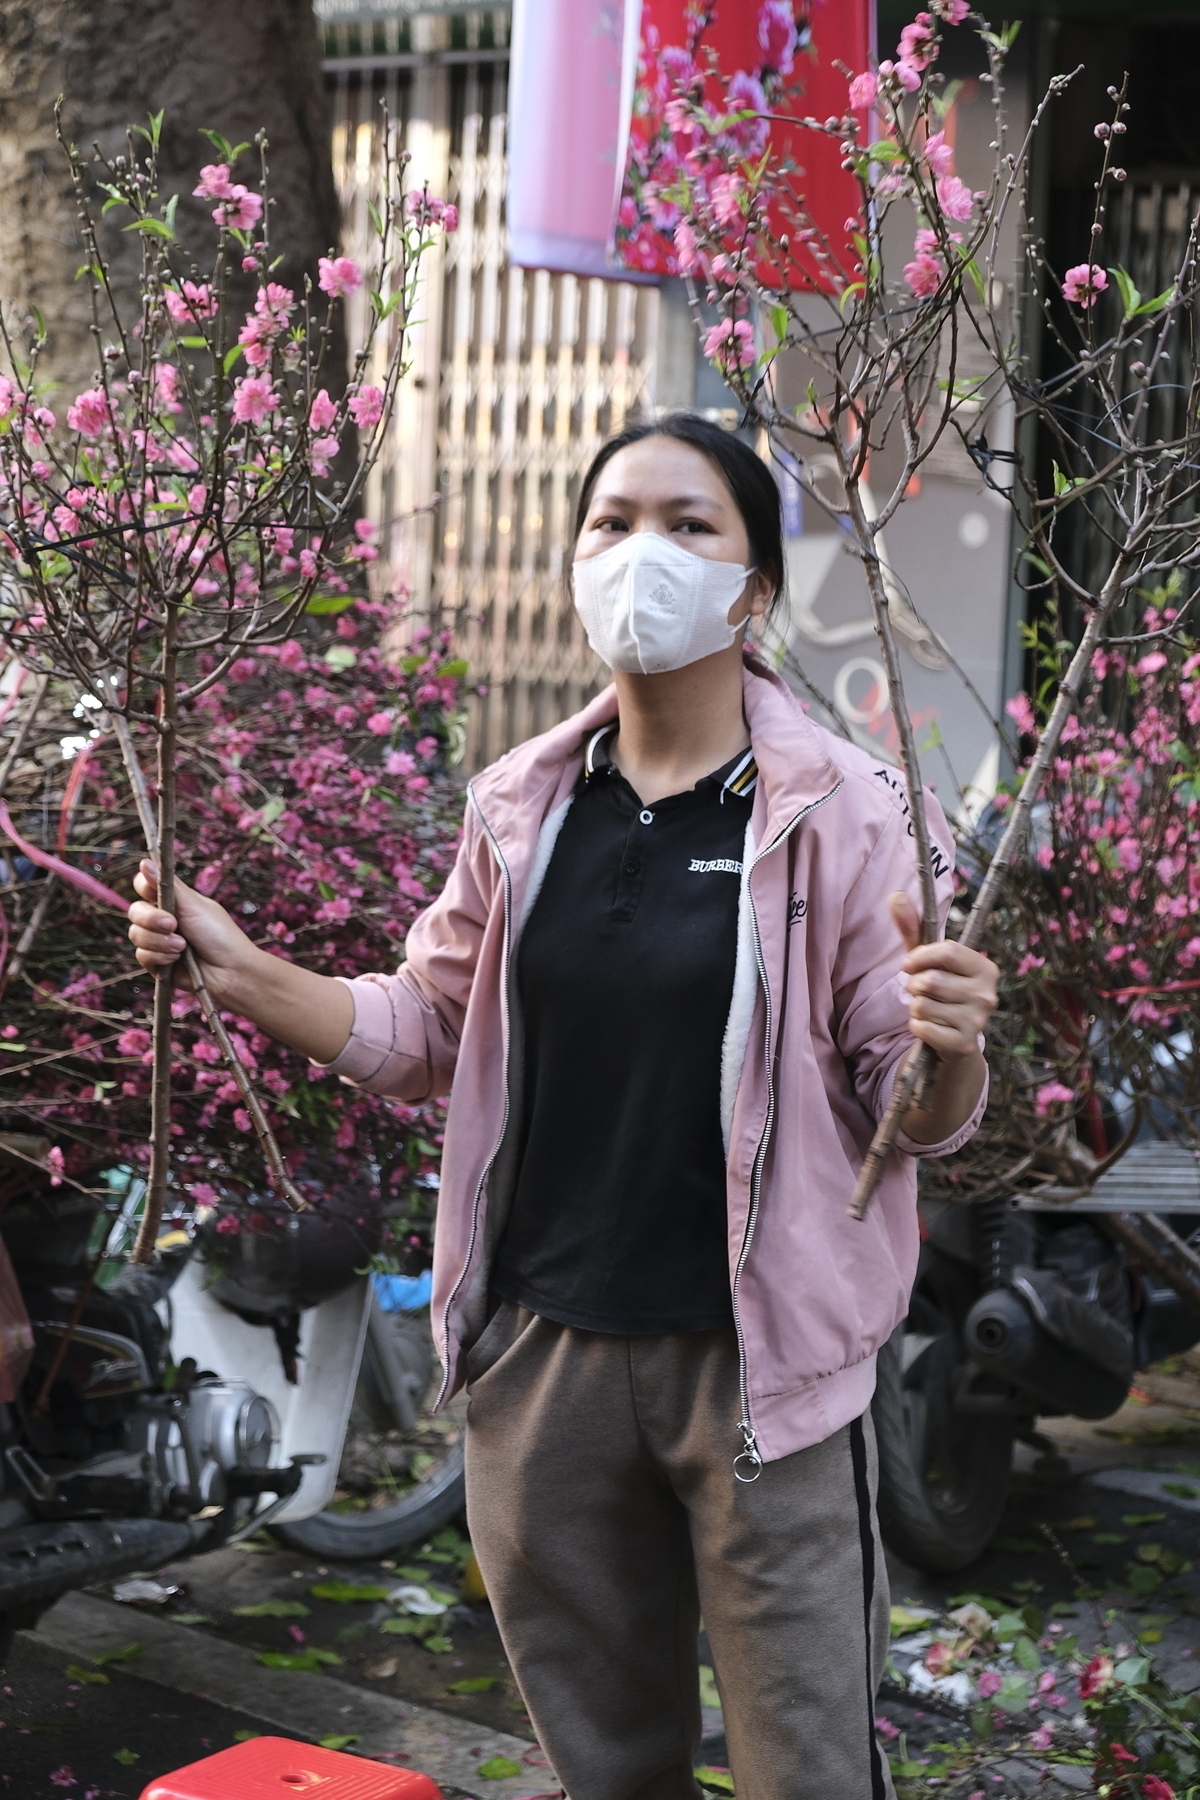 A woman holding two cherry blossom branches, waiting for customers to buy it. She wears a white masks and casual clothing. Her face signals waiting, and perhaps a bit of stress. Many potential customers are on this road. In the background, there aer more trees, and a white fence.